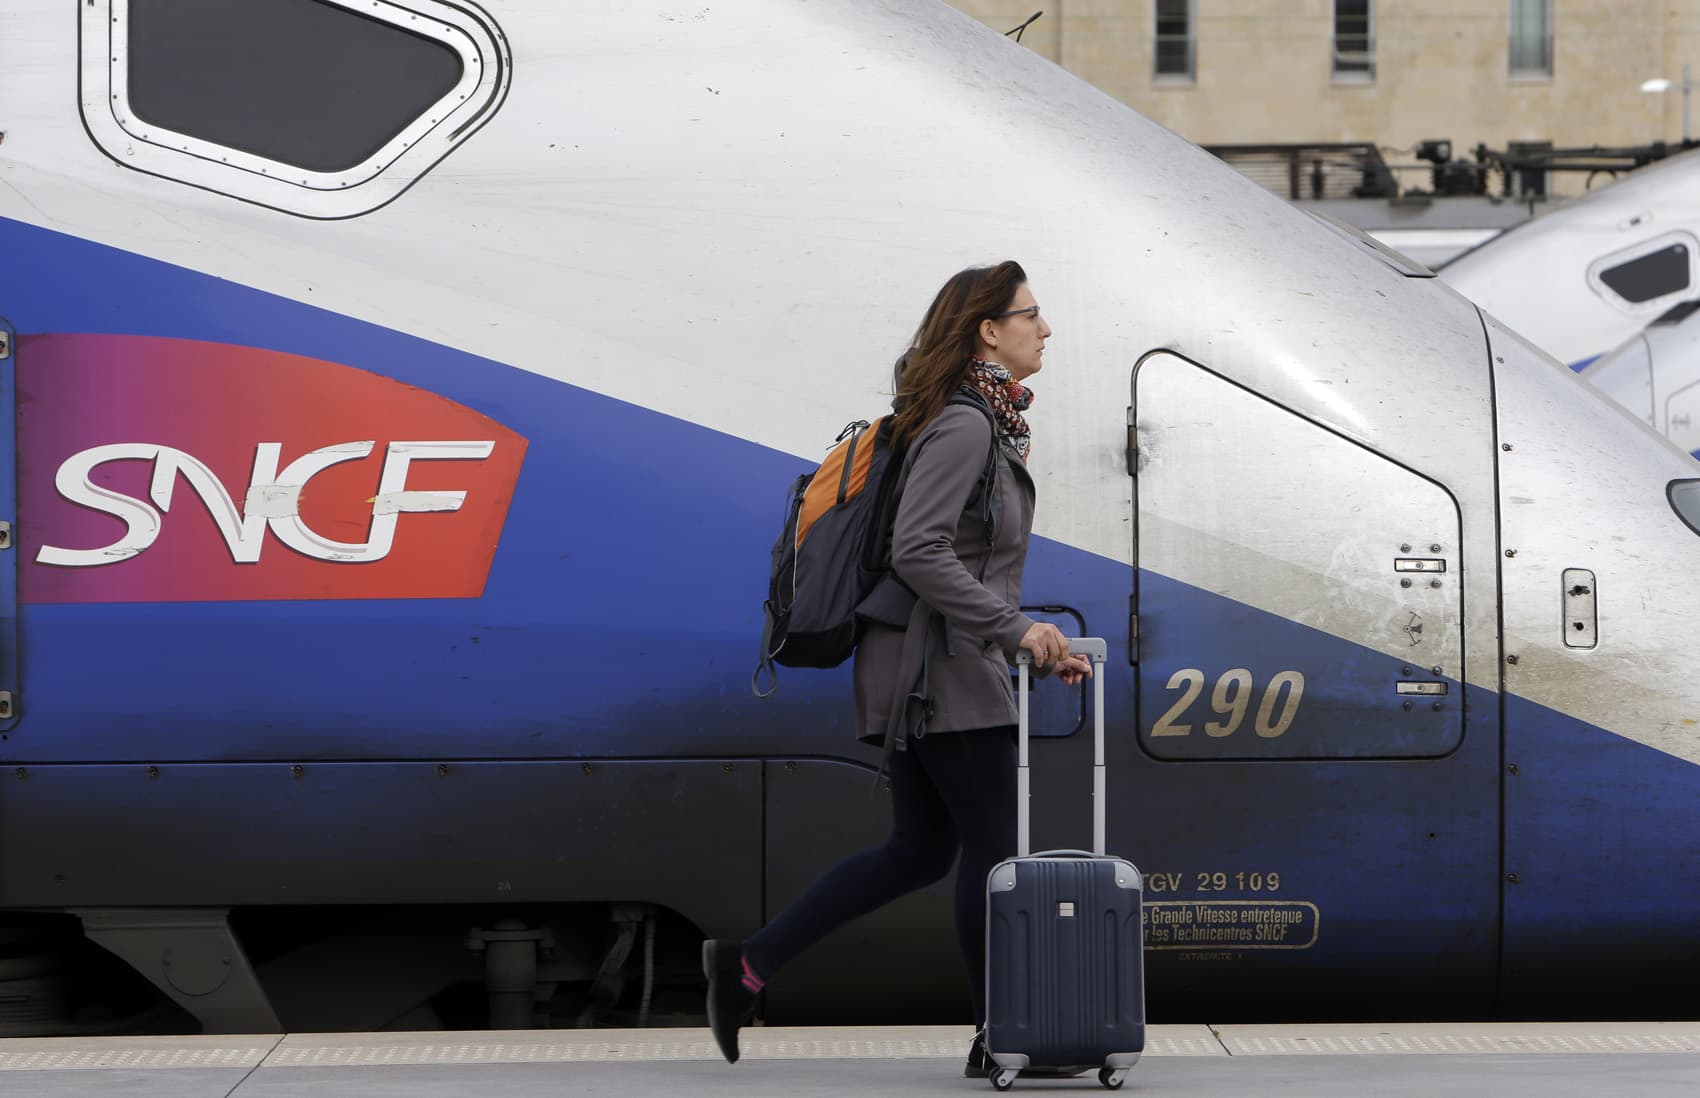 A woman walks past high-speed trains at the Saint Charles station in Marseille, southern France, Tuesday April 3, 2018. (Claude Paris/AP)